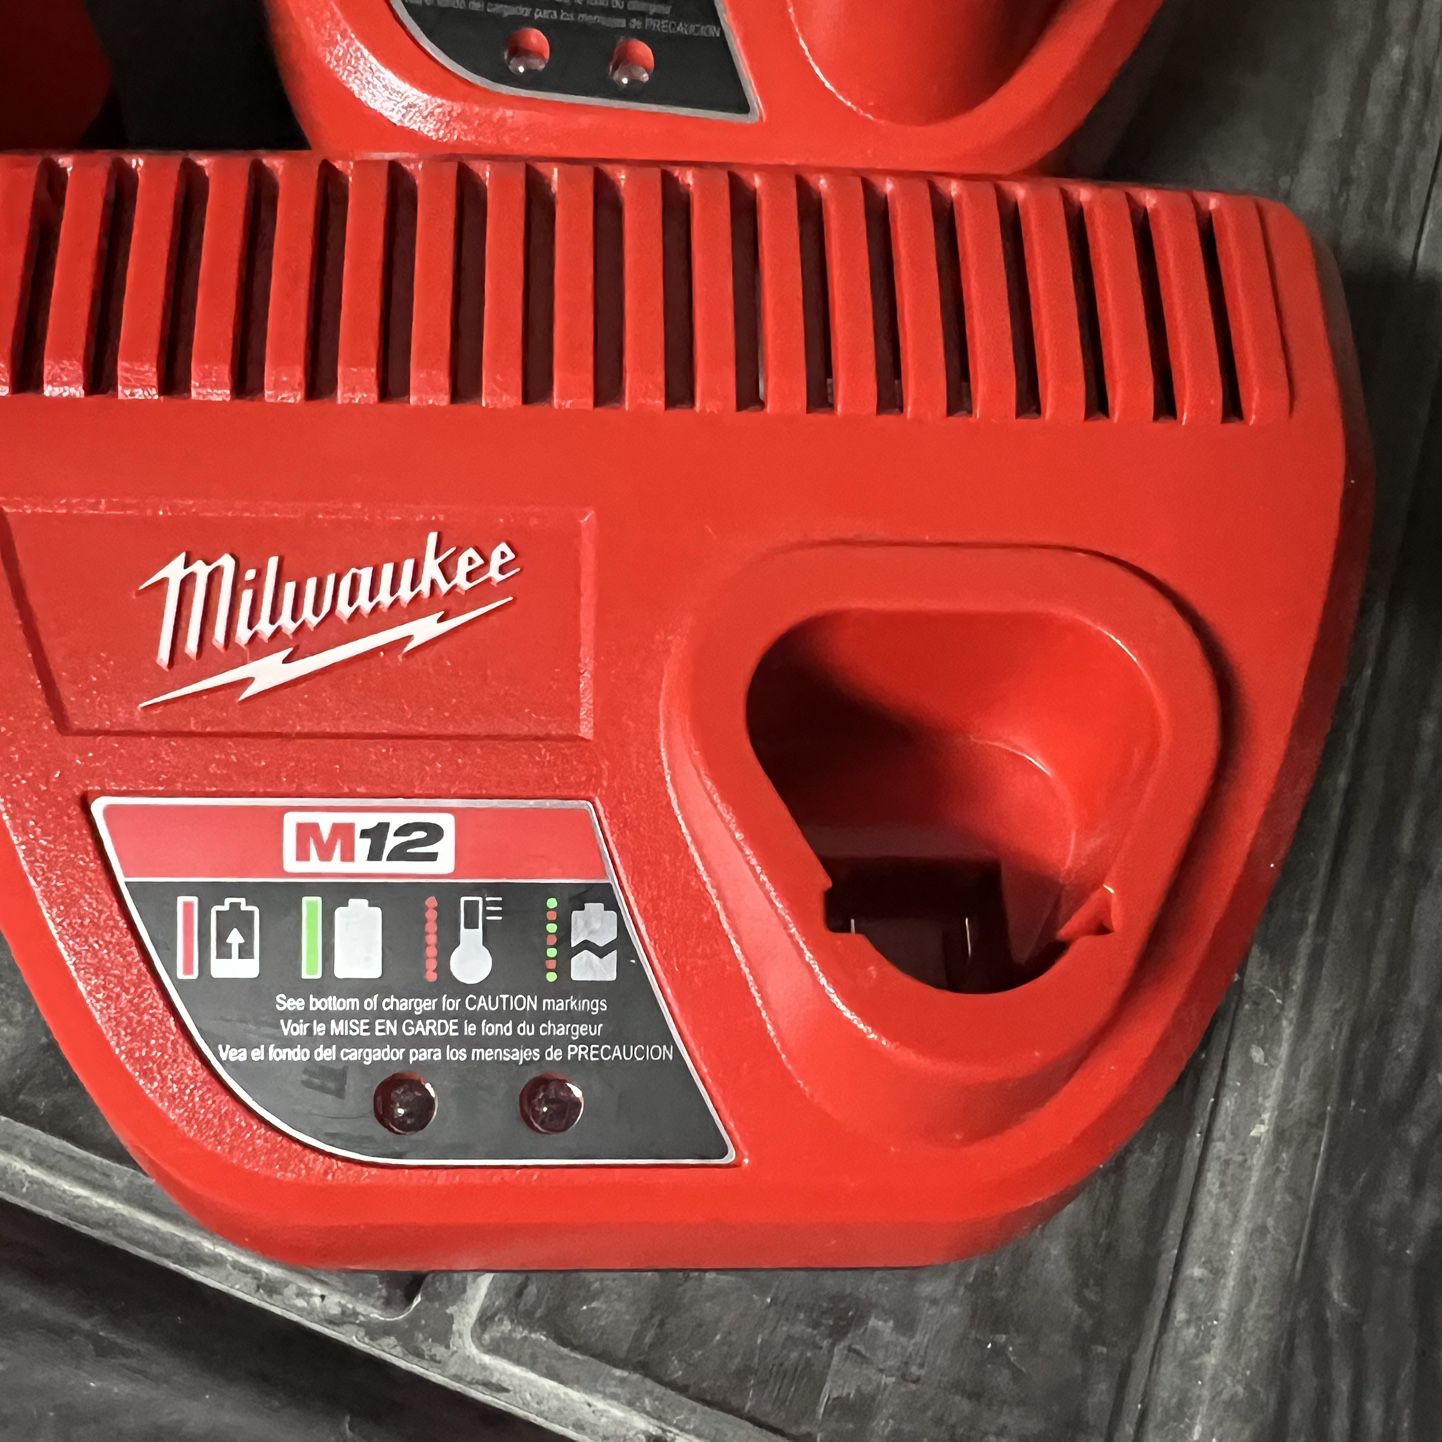 Milwaukee M12 Chargers. 4 Total